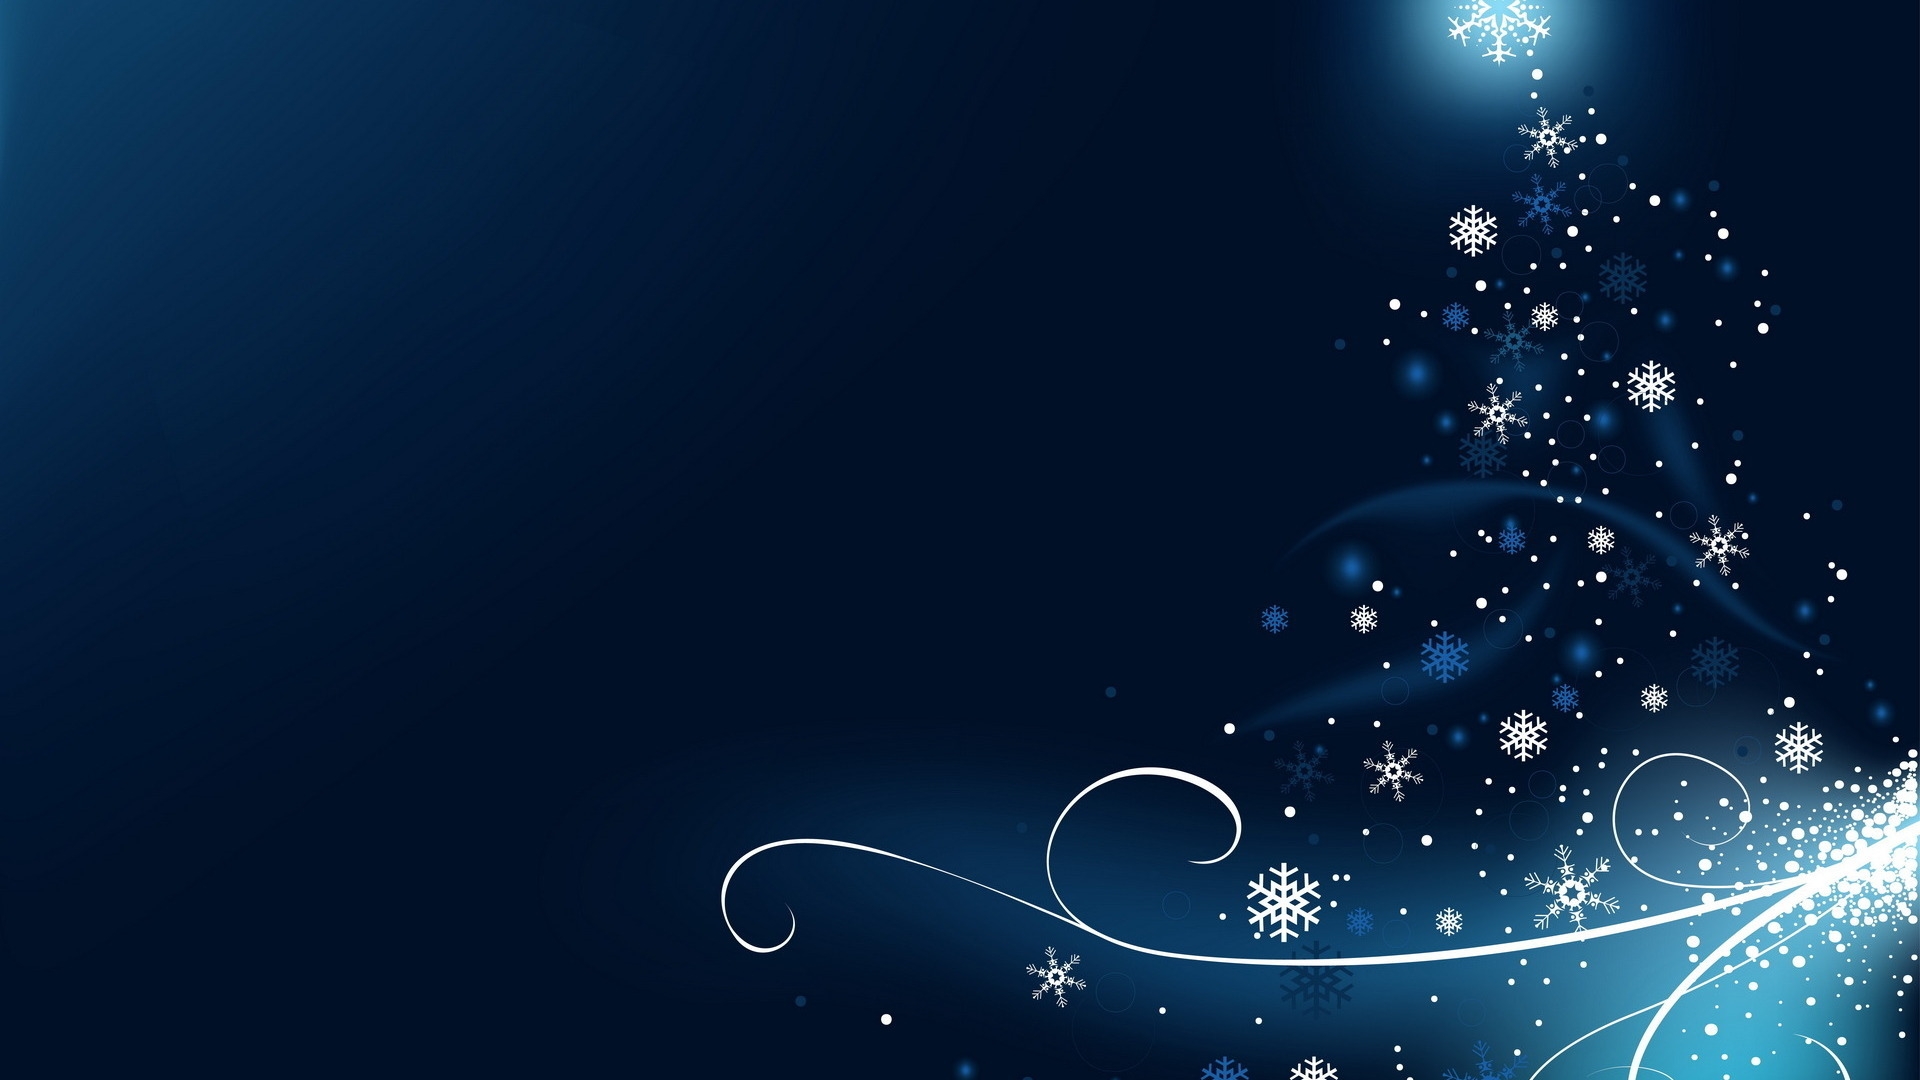 Snowflakes for 1920 x 1080 HDTV 1080p resolution